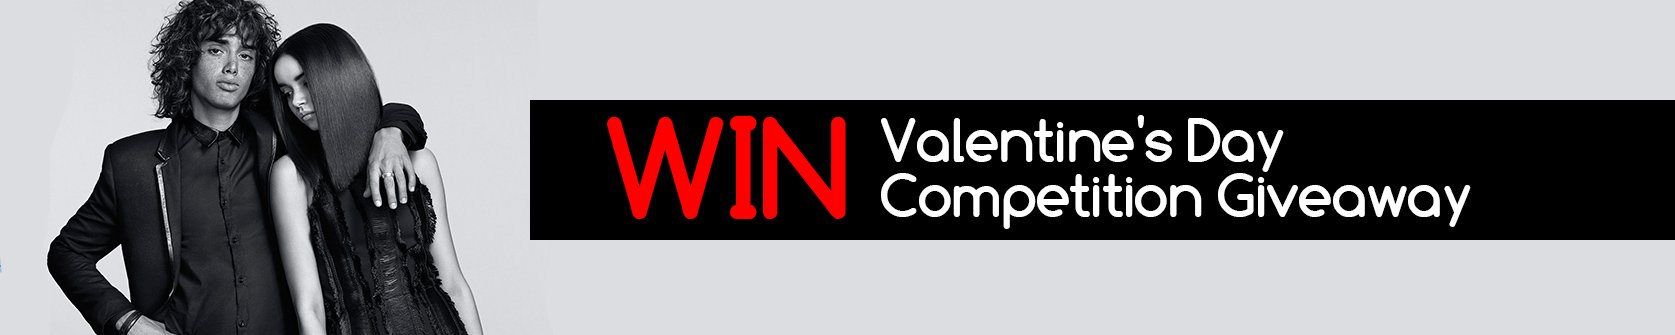 win-valentines-day-competition-giveaway-banner